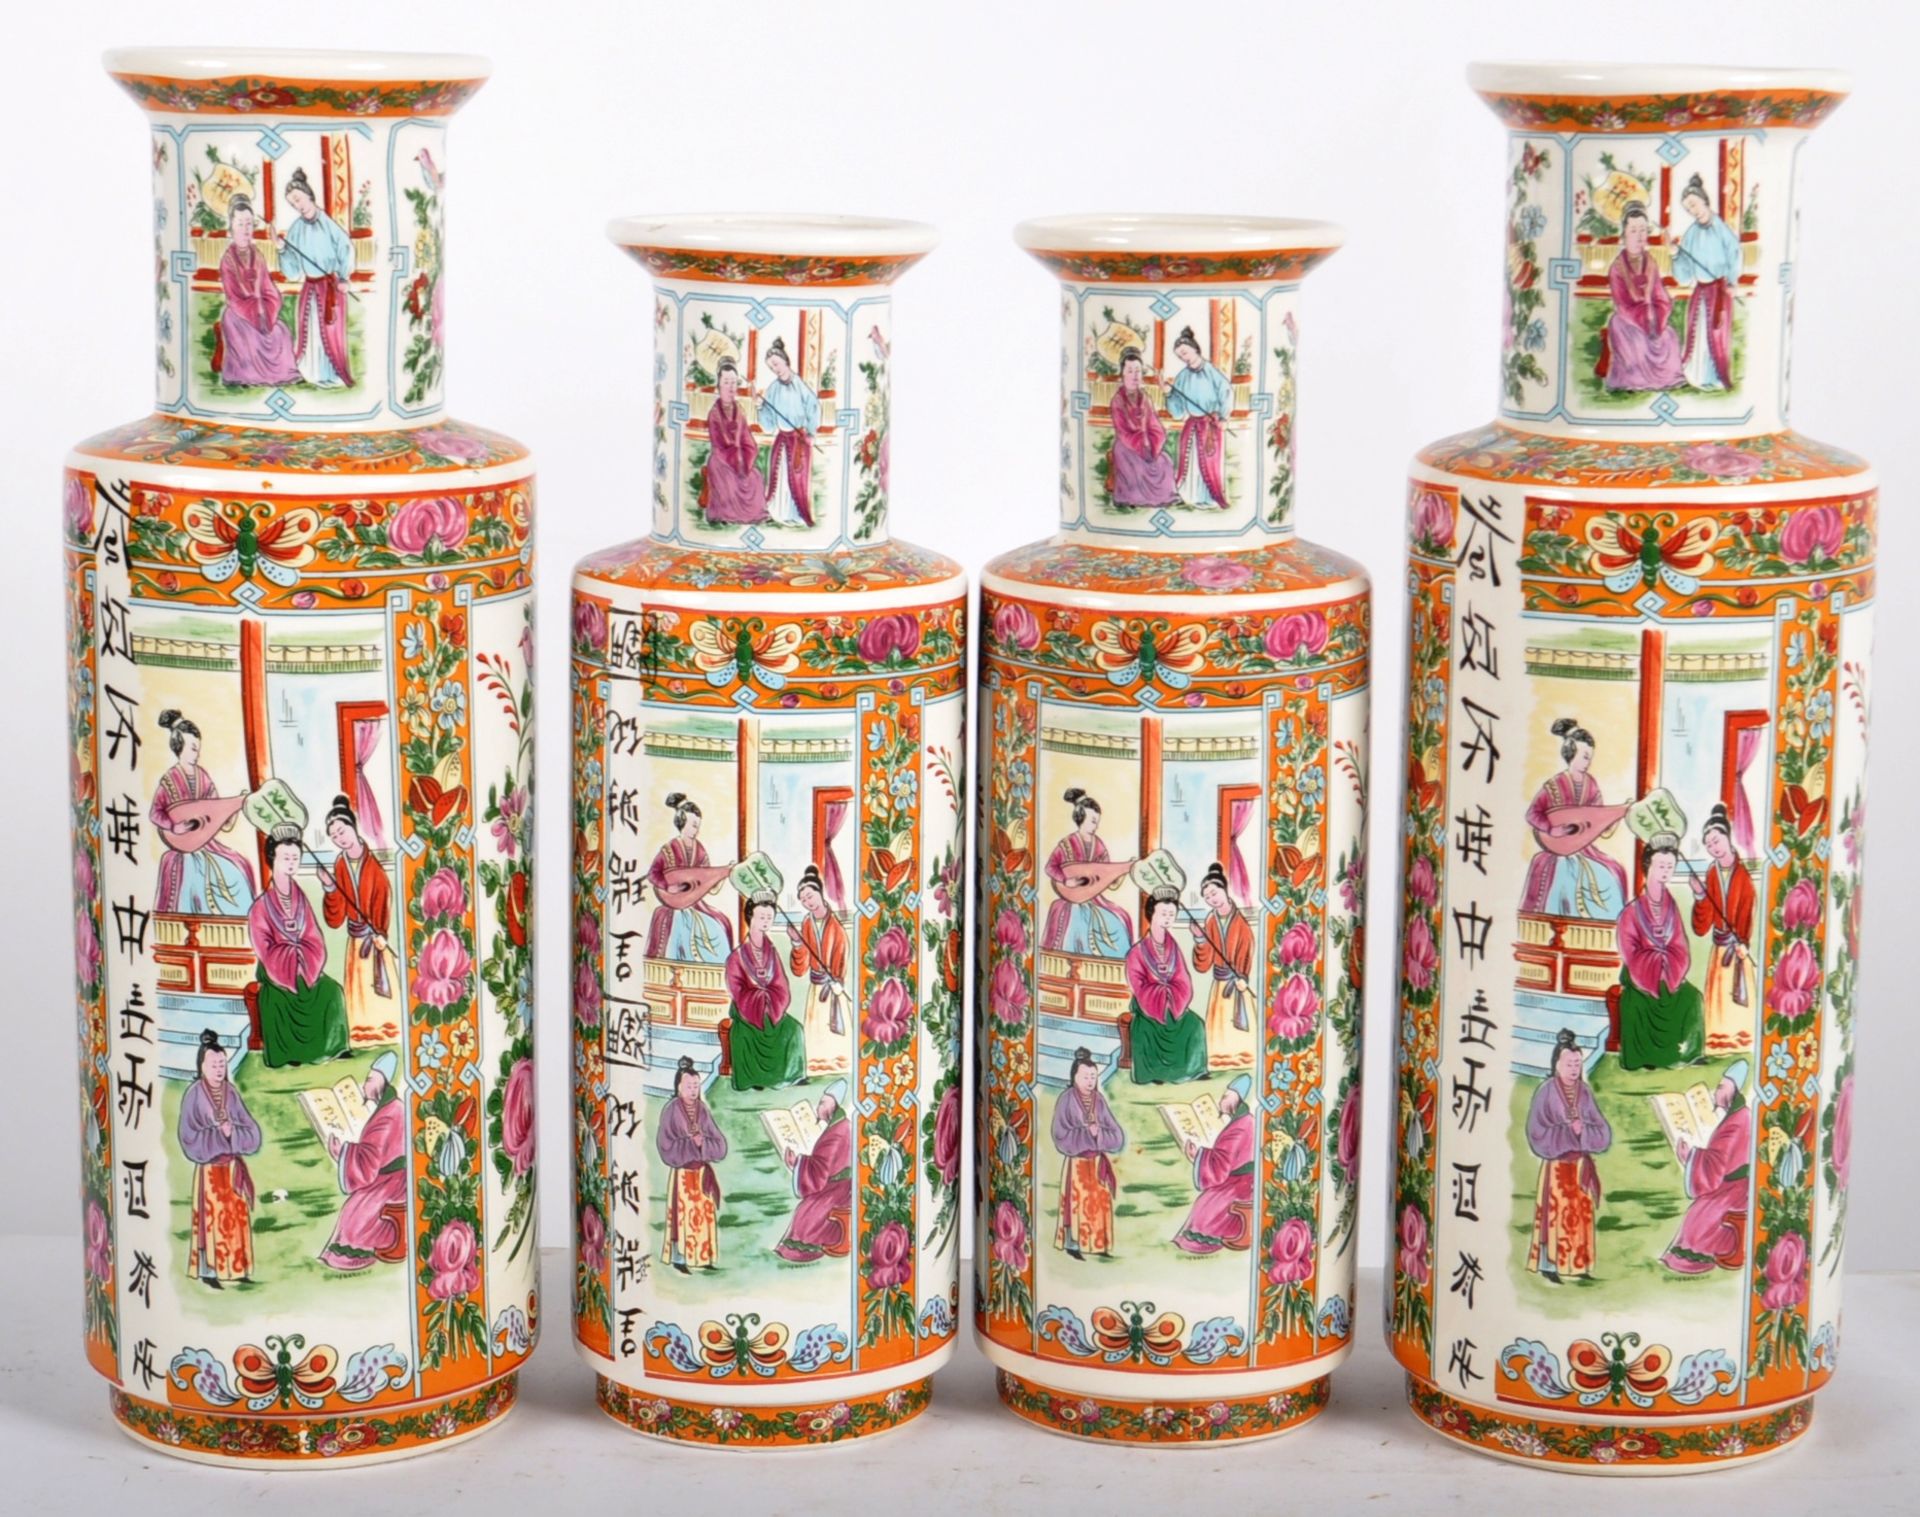 MATCHING SET OF FOUR CHINESE FAMILLE ROSE VASES - Image 5 of 11